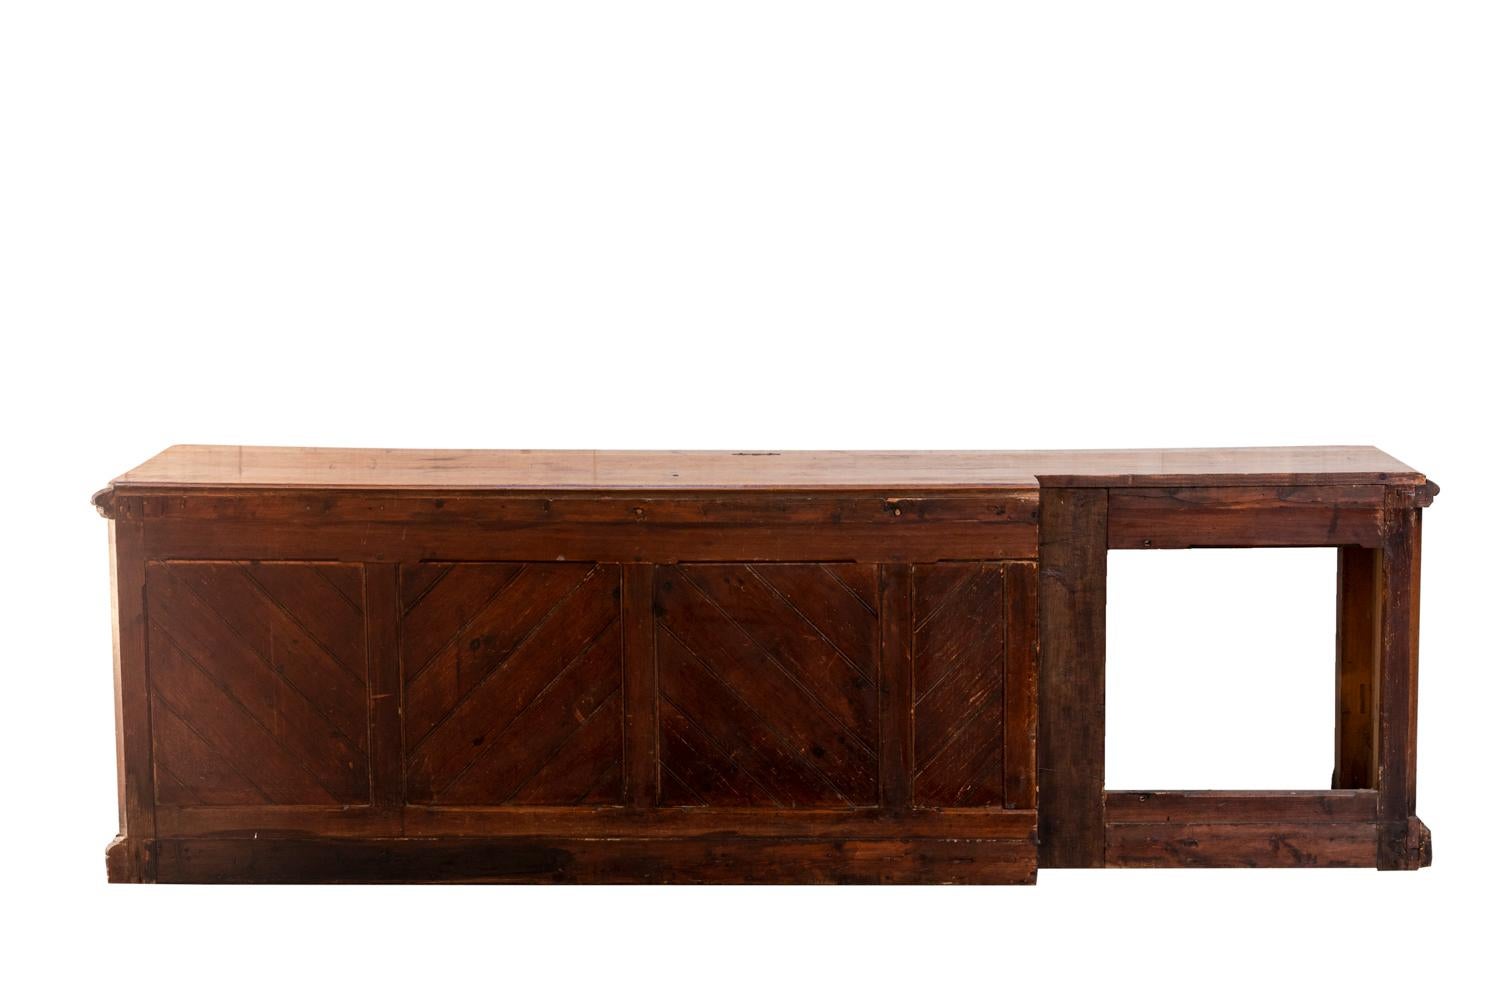 Office desk opening by one drawer in the center of the tray. Straight molded tray and legs. Partitioned back apart for the left part, which is shifted upon the front. Coin slot adorned with a chiseled metal piece. Varnished natural fir tree.

Work